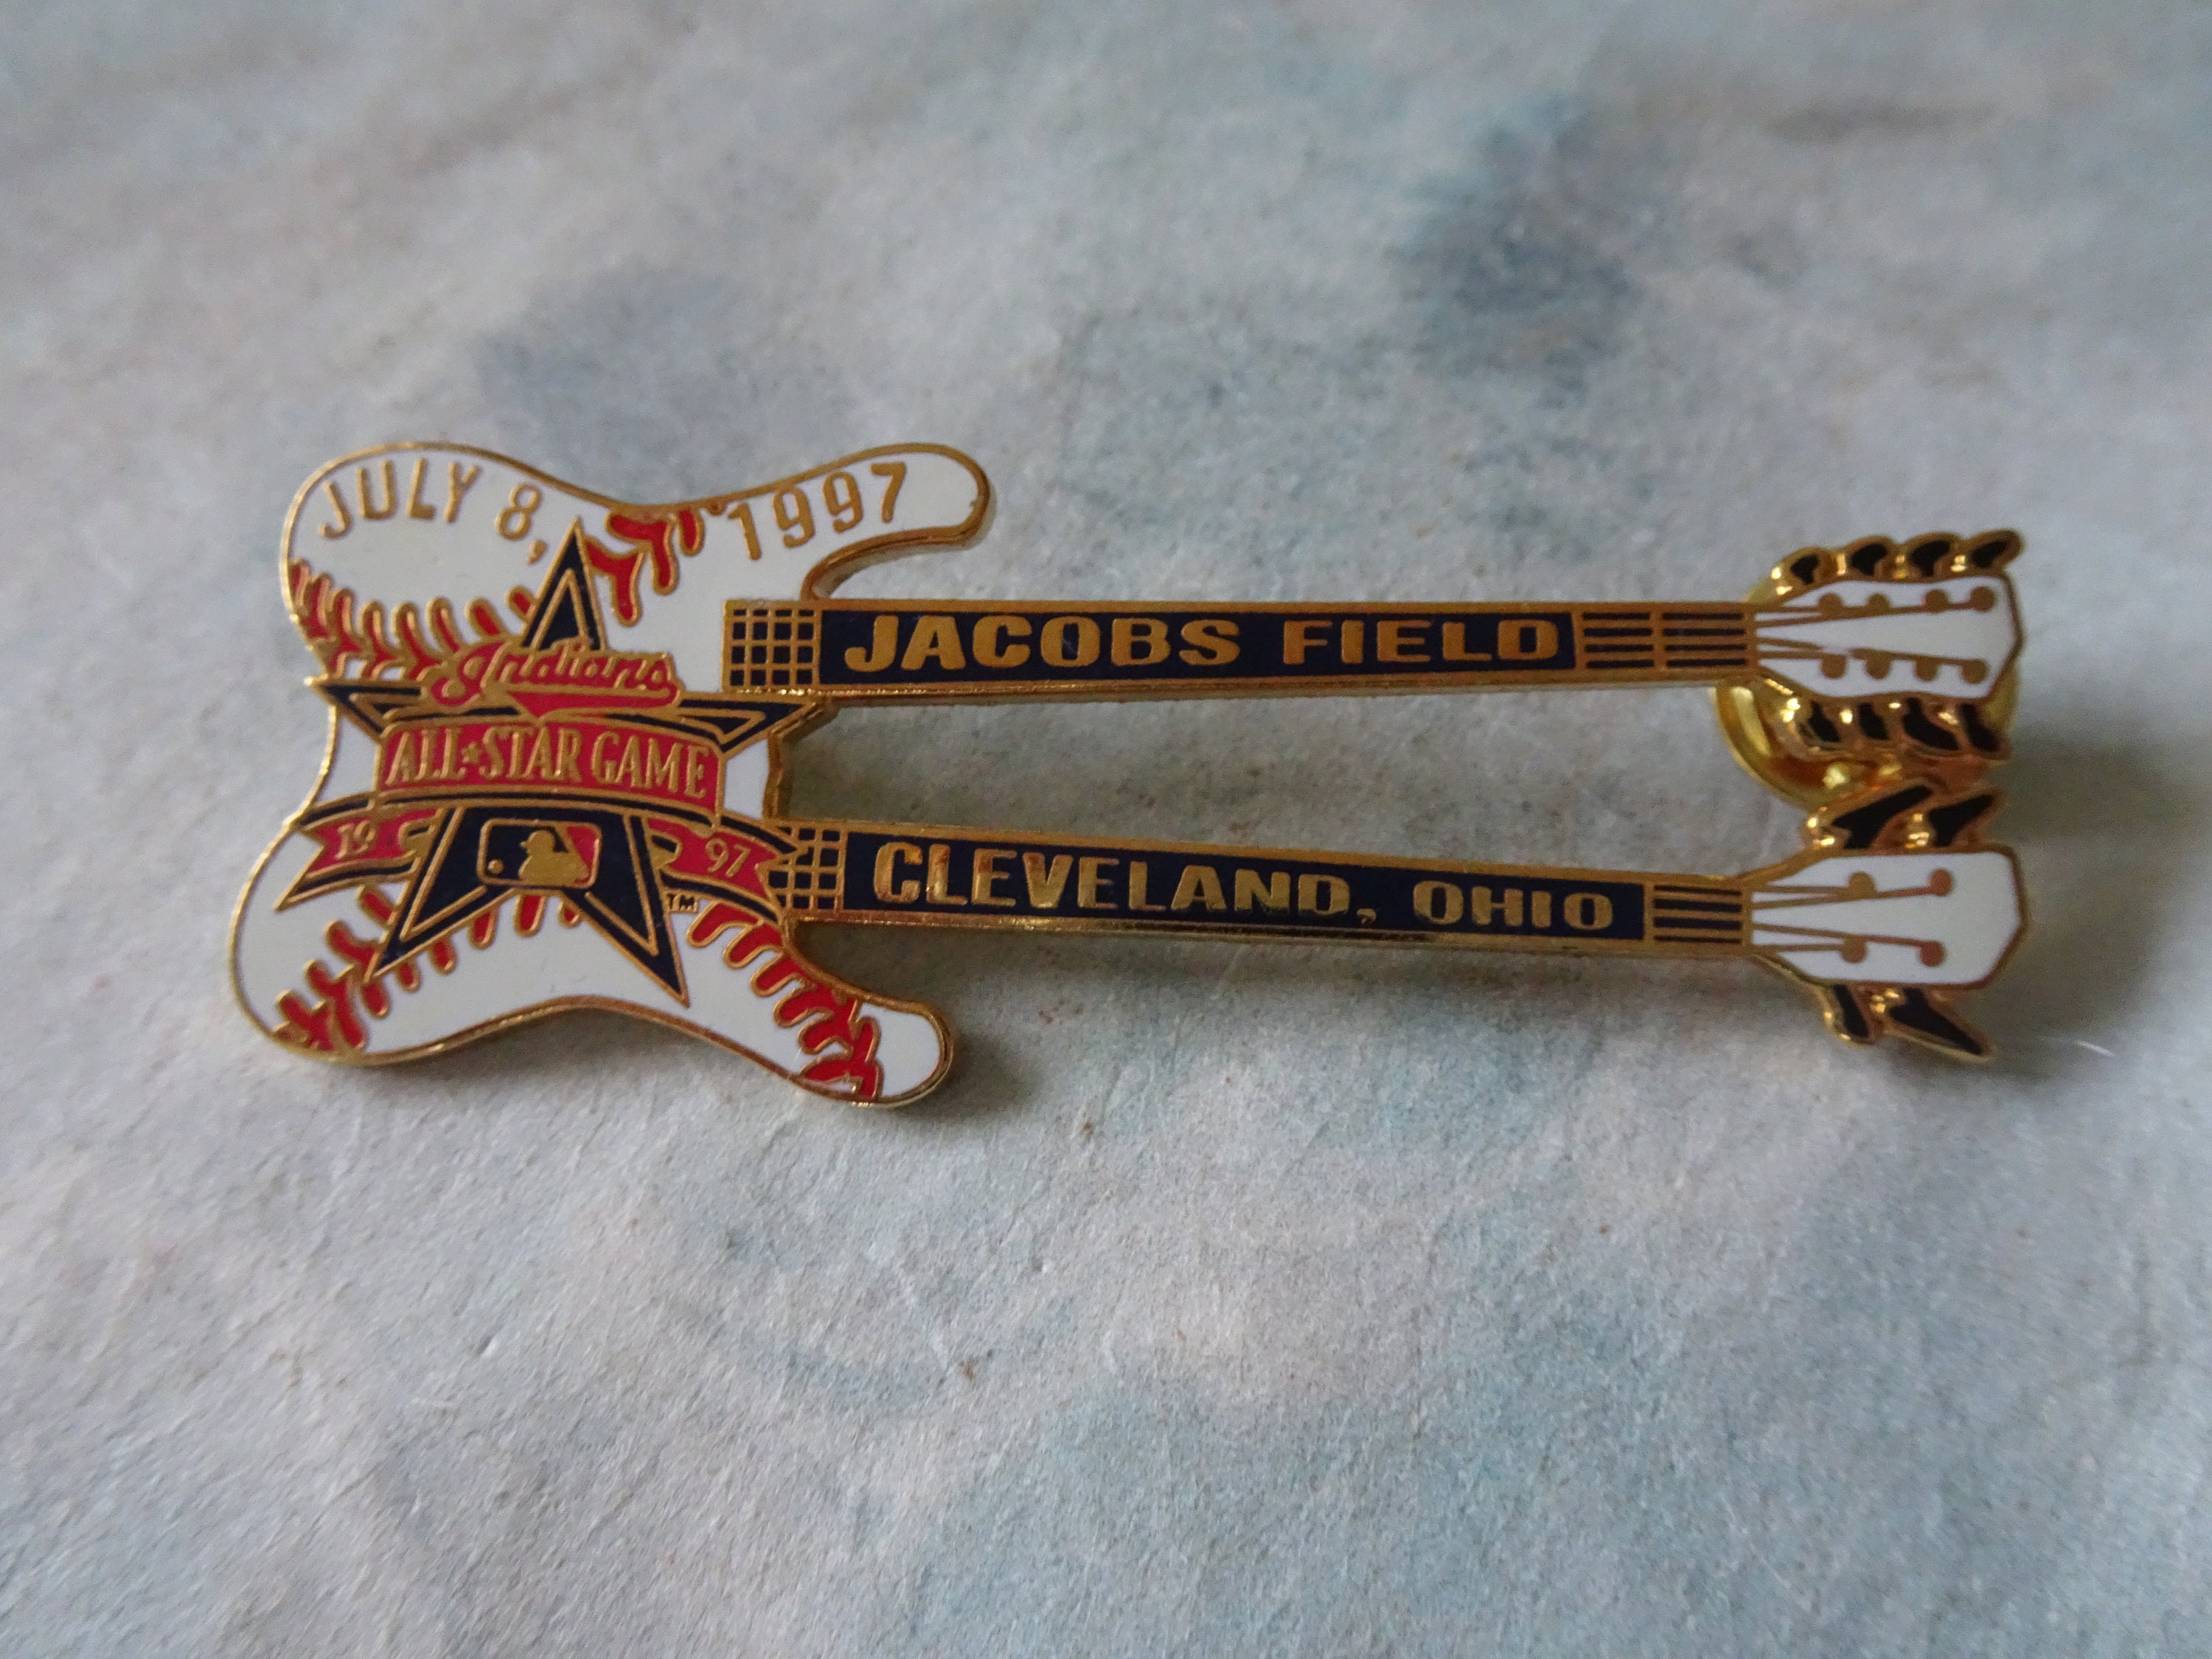 Band Pins  Custom Lapel Pins for Recognizing your Band